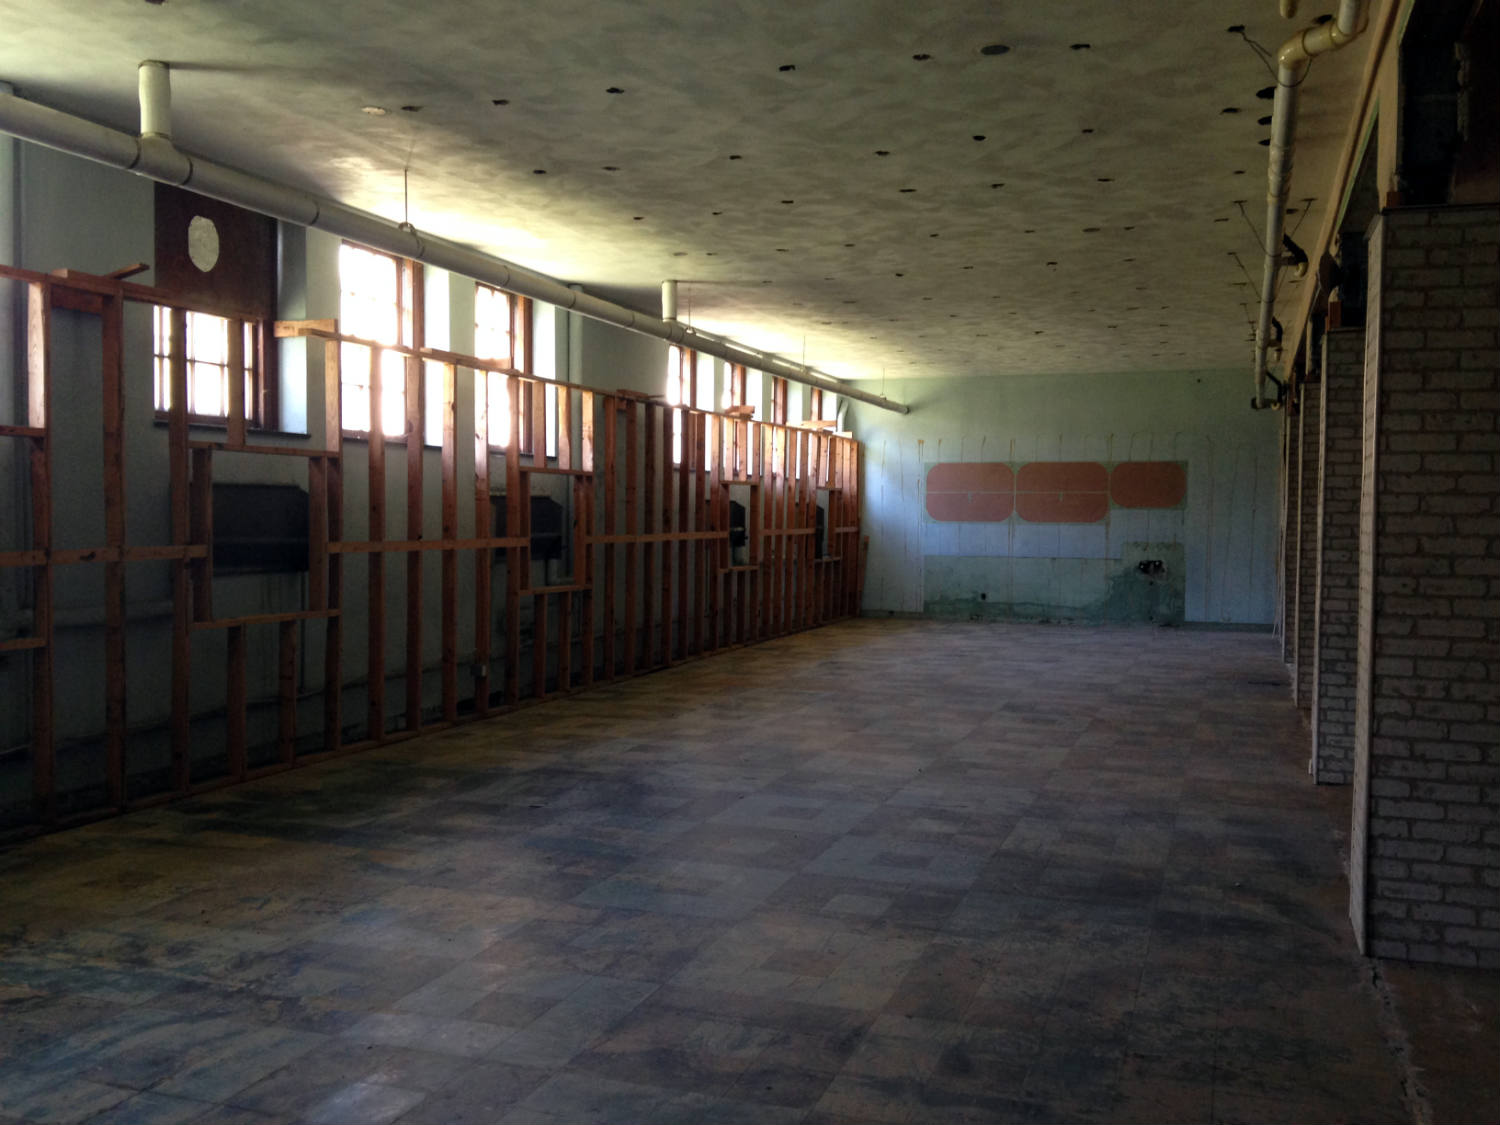 Former Cafeteria in the former St. Michael's Mission in Conesus, NY